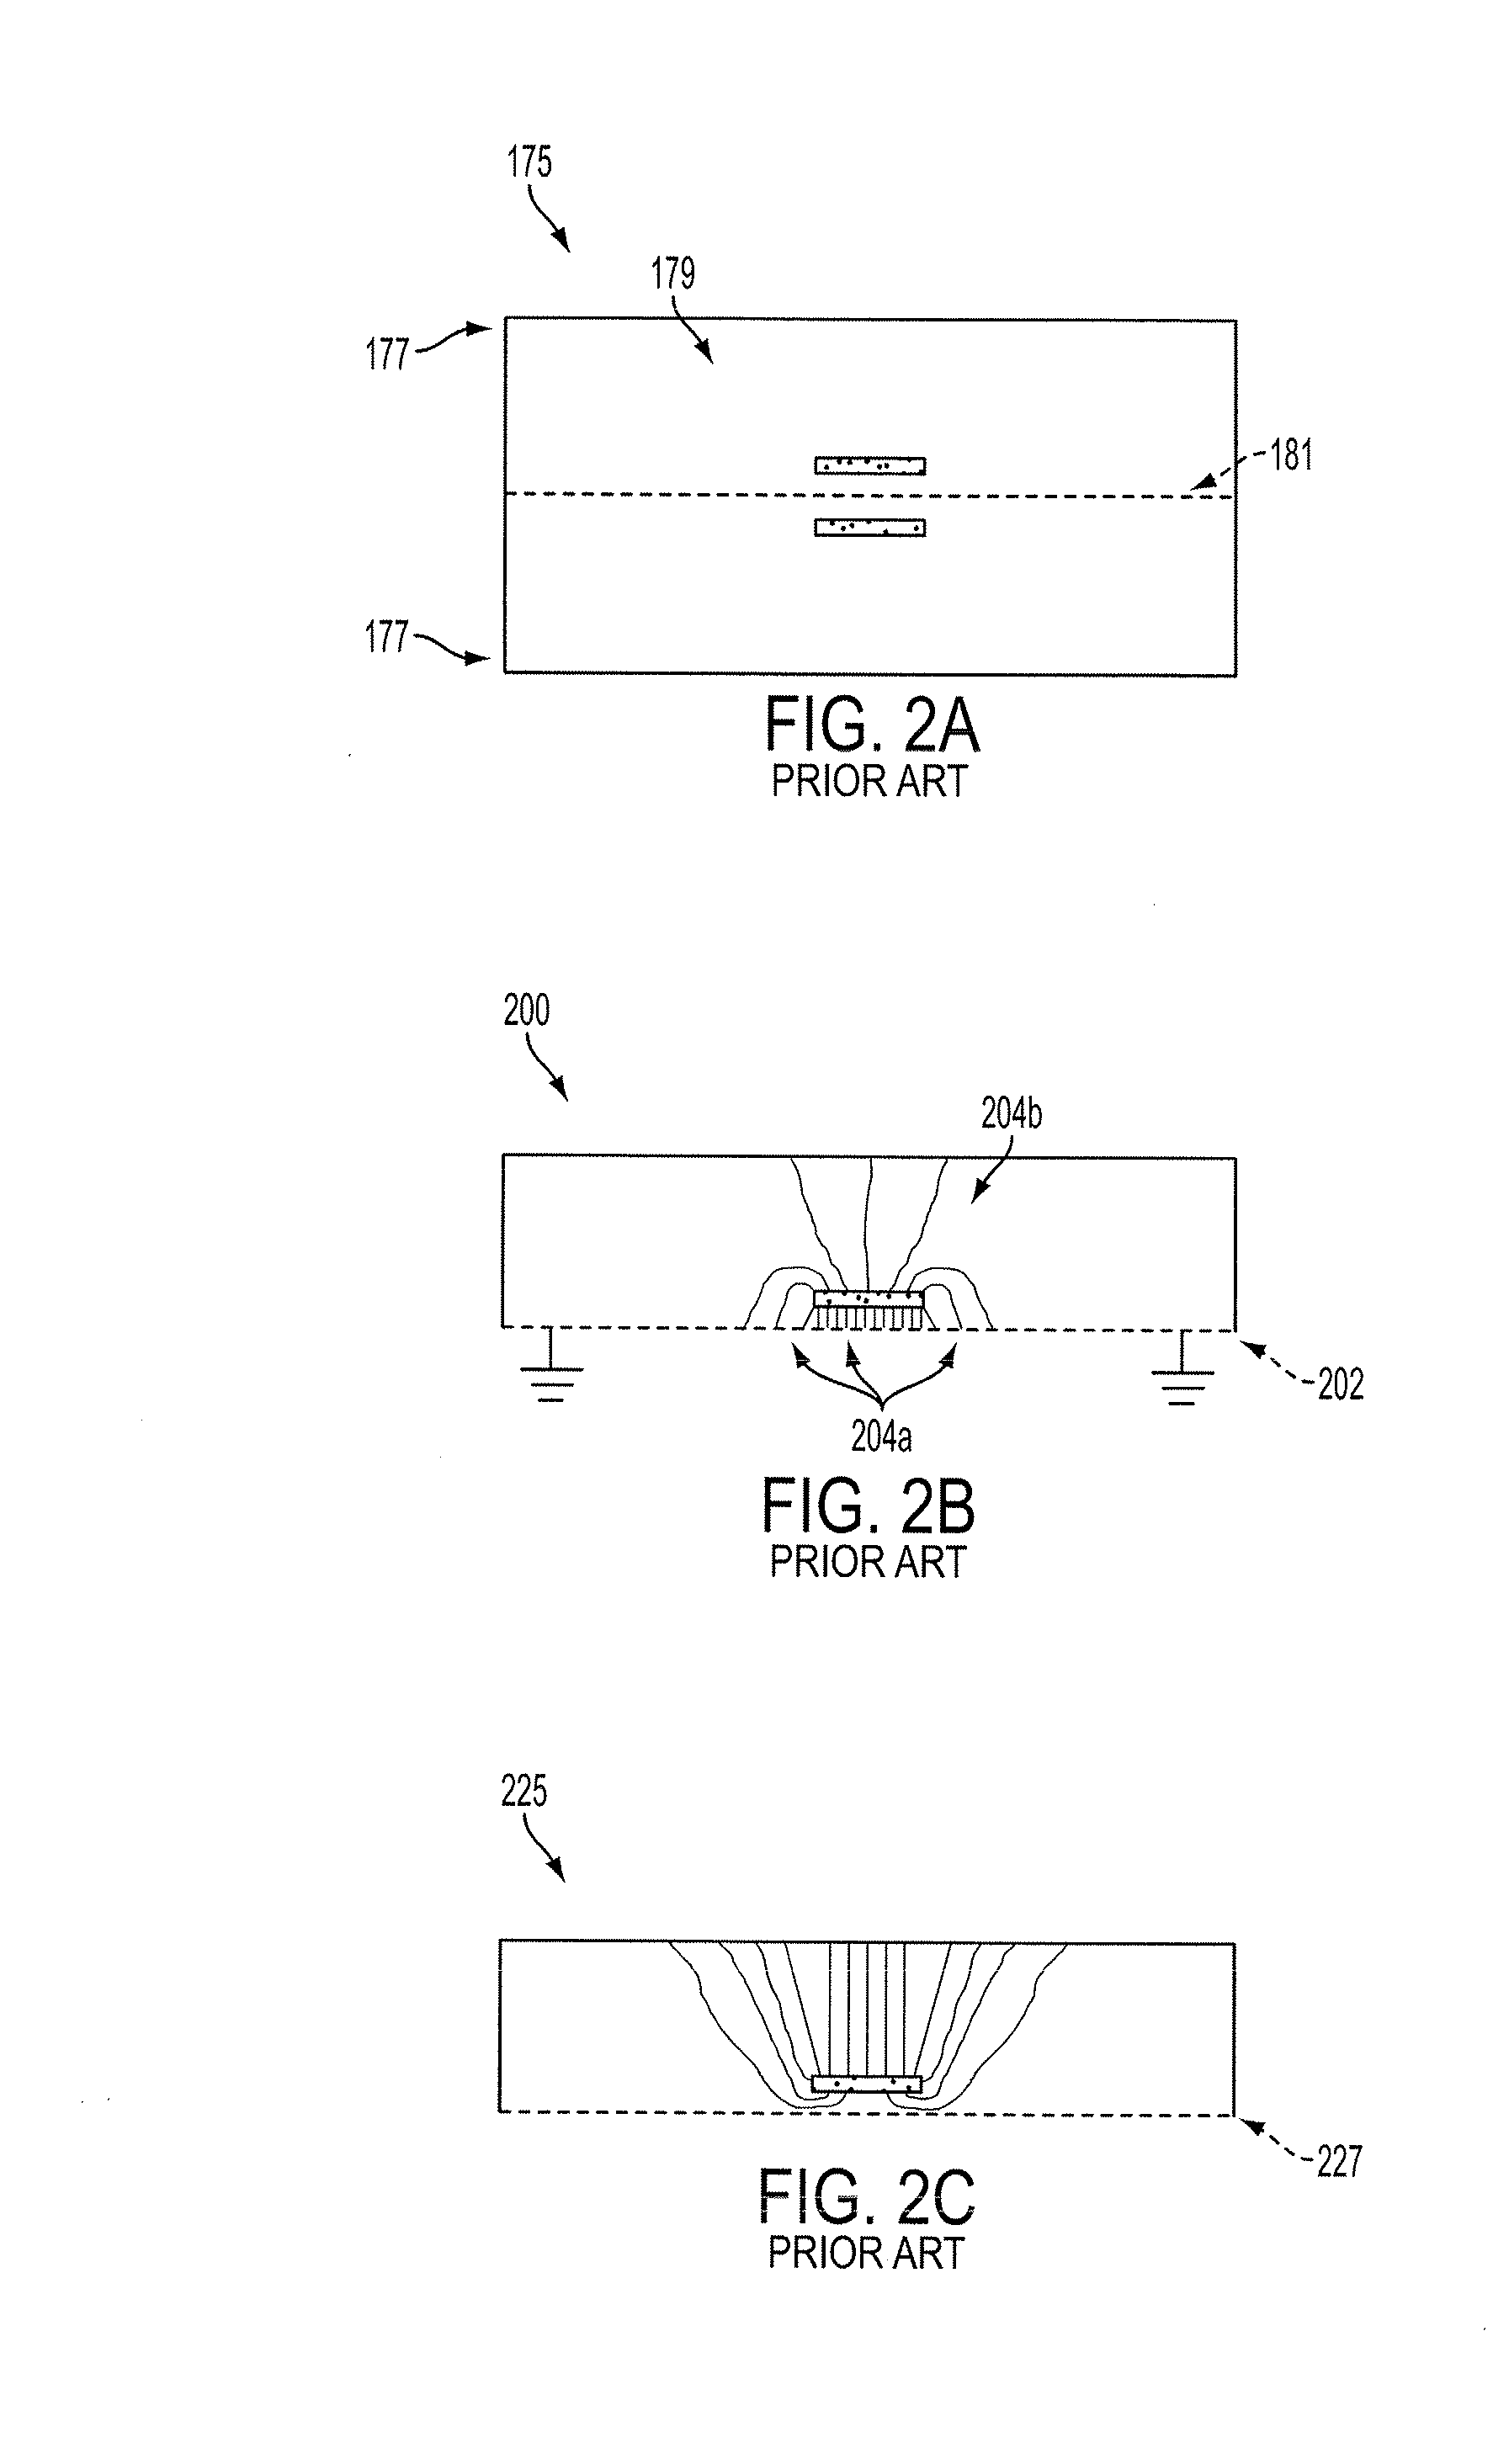 Wideband Balun Using Re-Entrant Coupled Lines and Ferrite Material